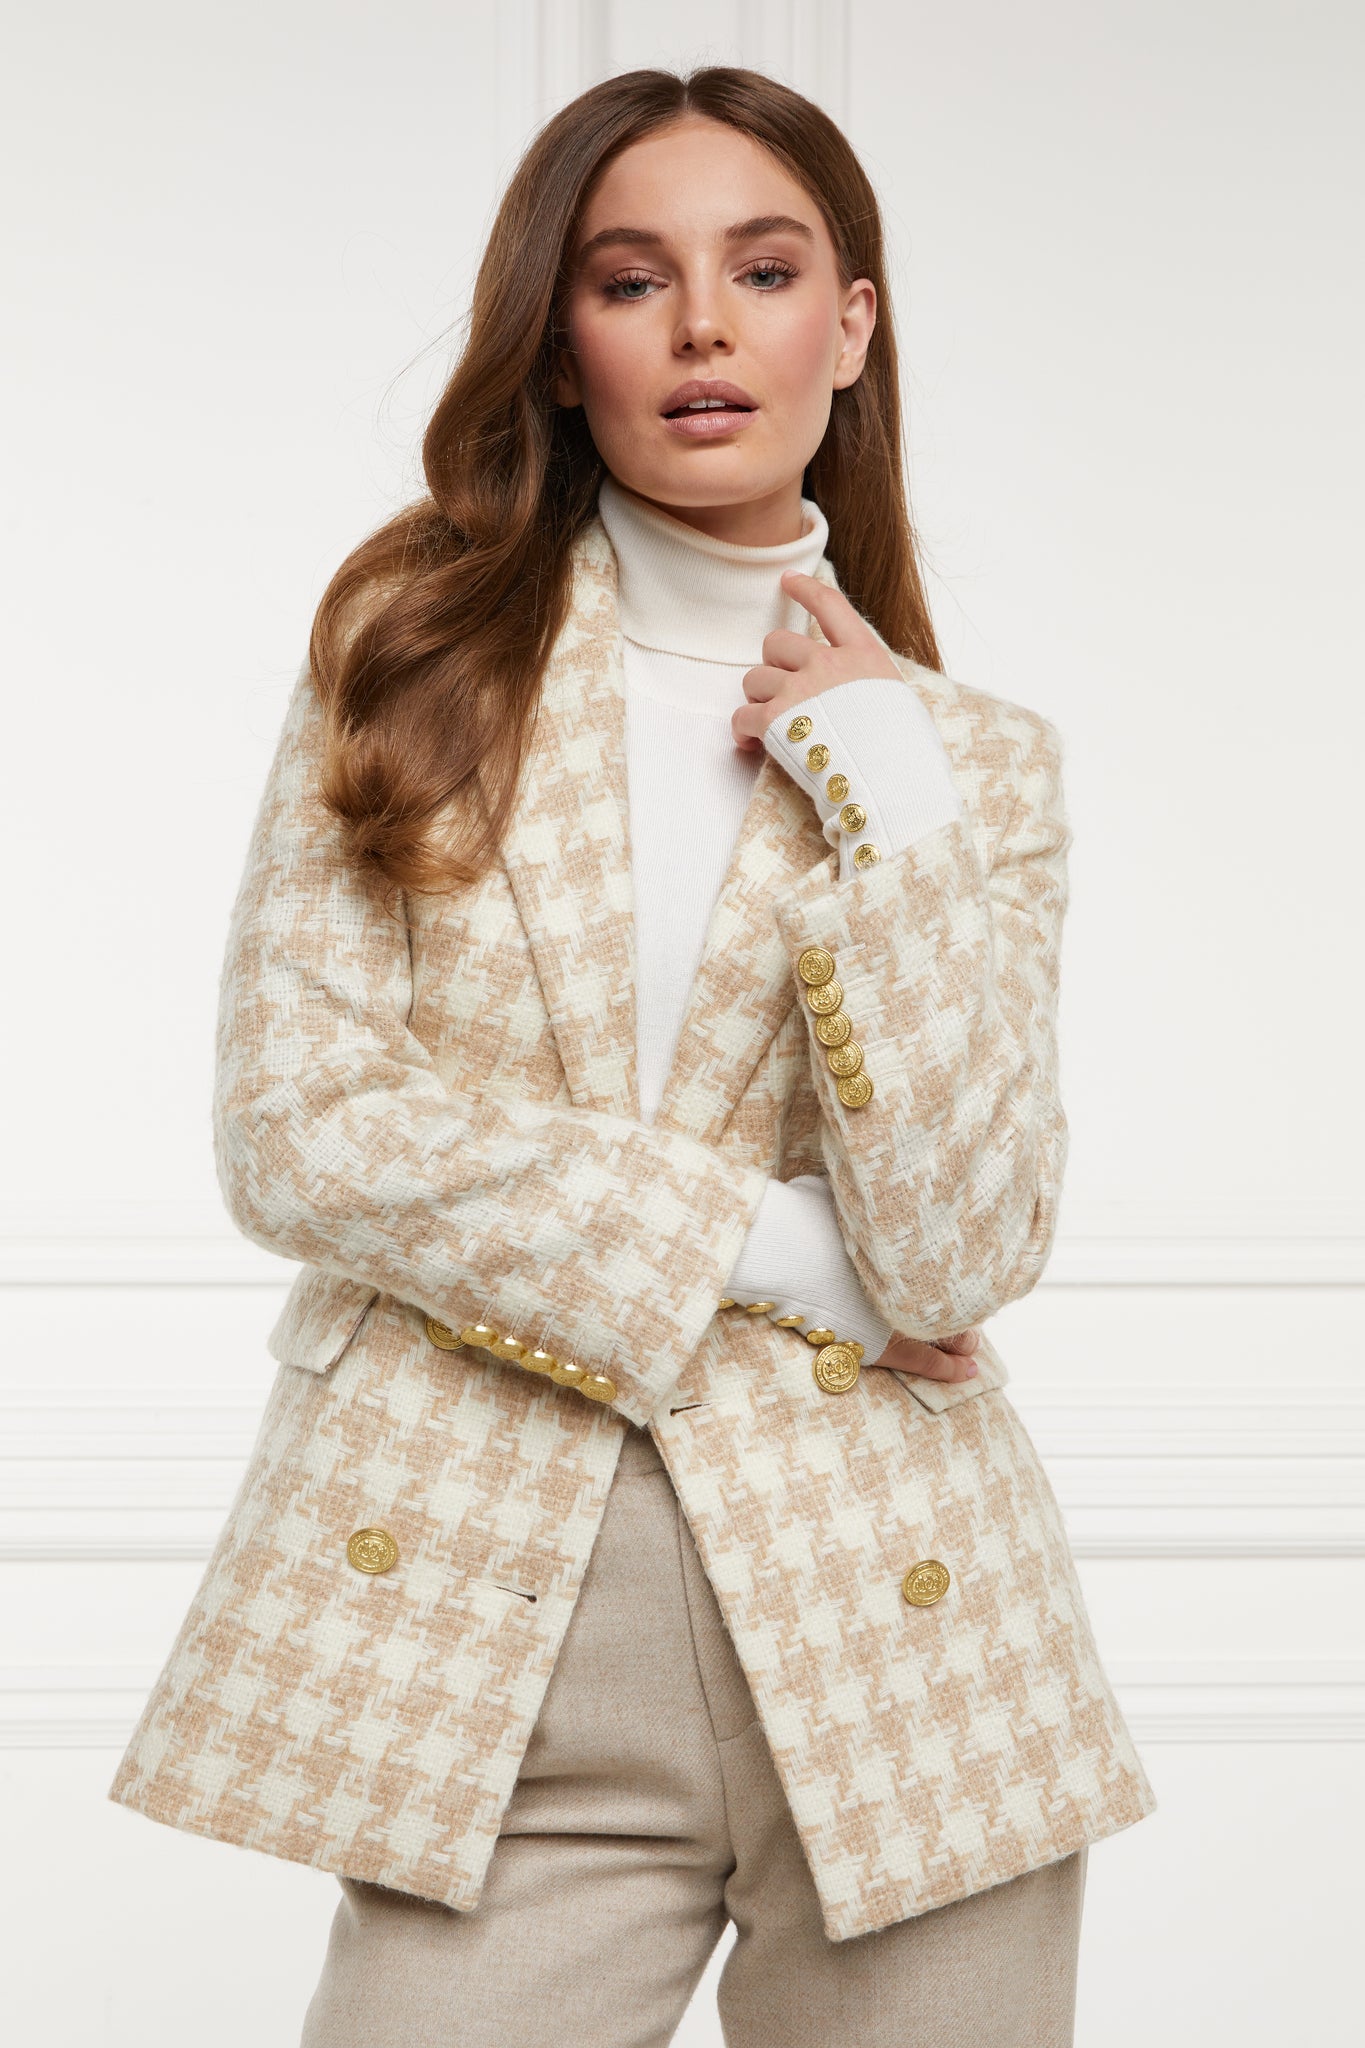 double breasted wool blazer in white and camel houndstooth with two hip pockets and gold button details down front and on cuffs and handmade in the uk